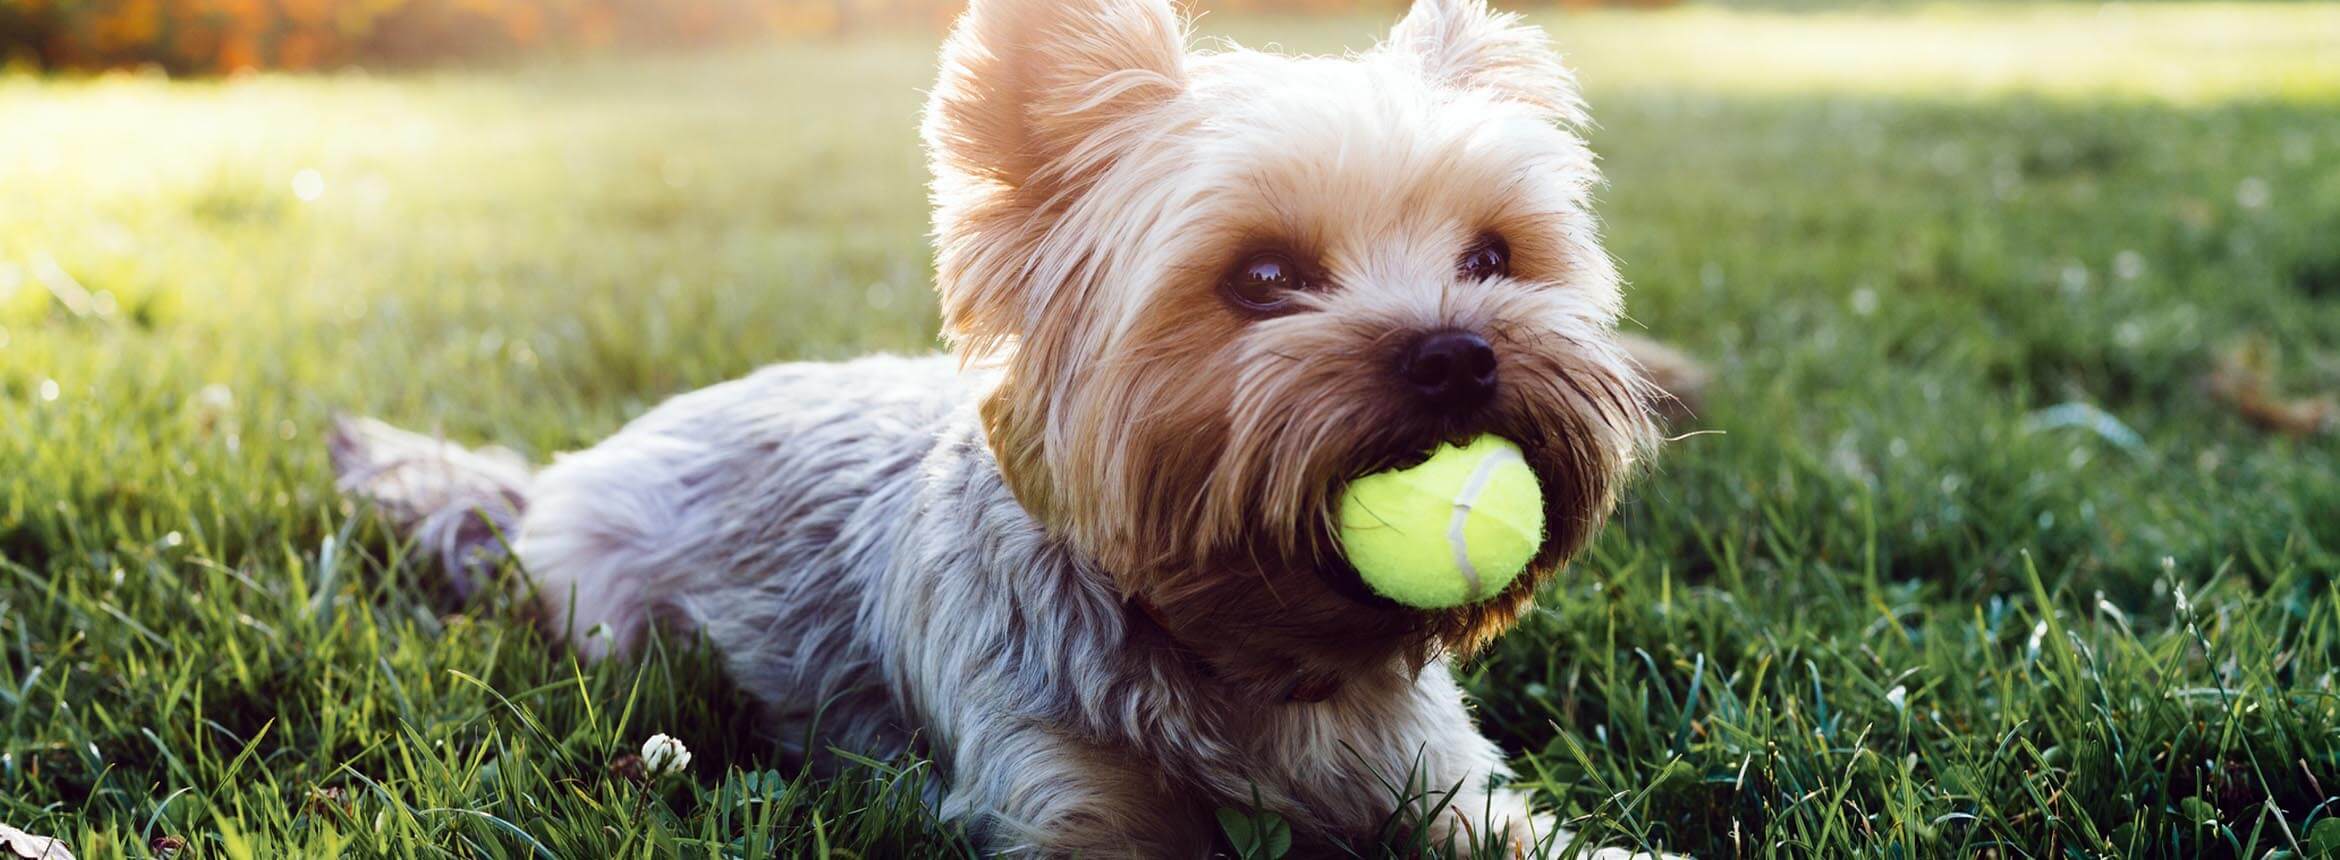 image of a yorkshire terrier